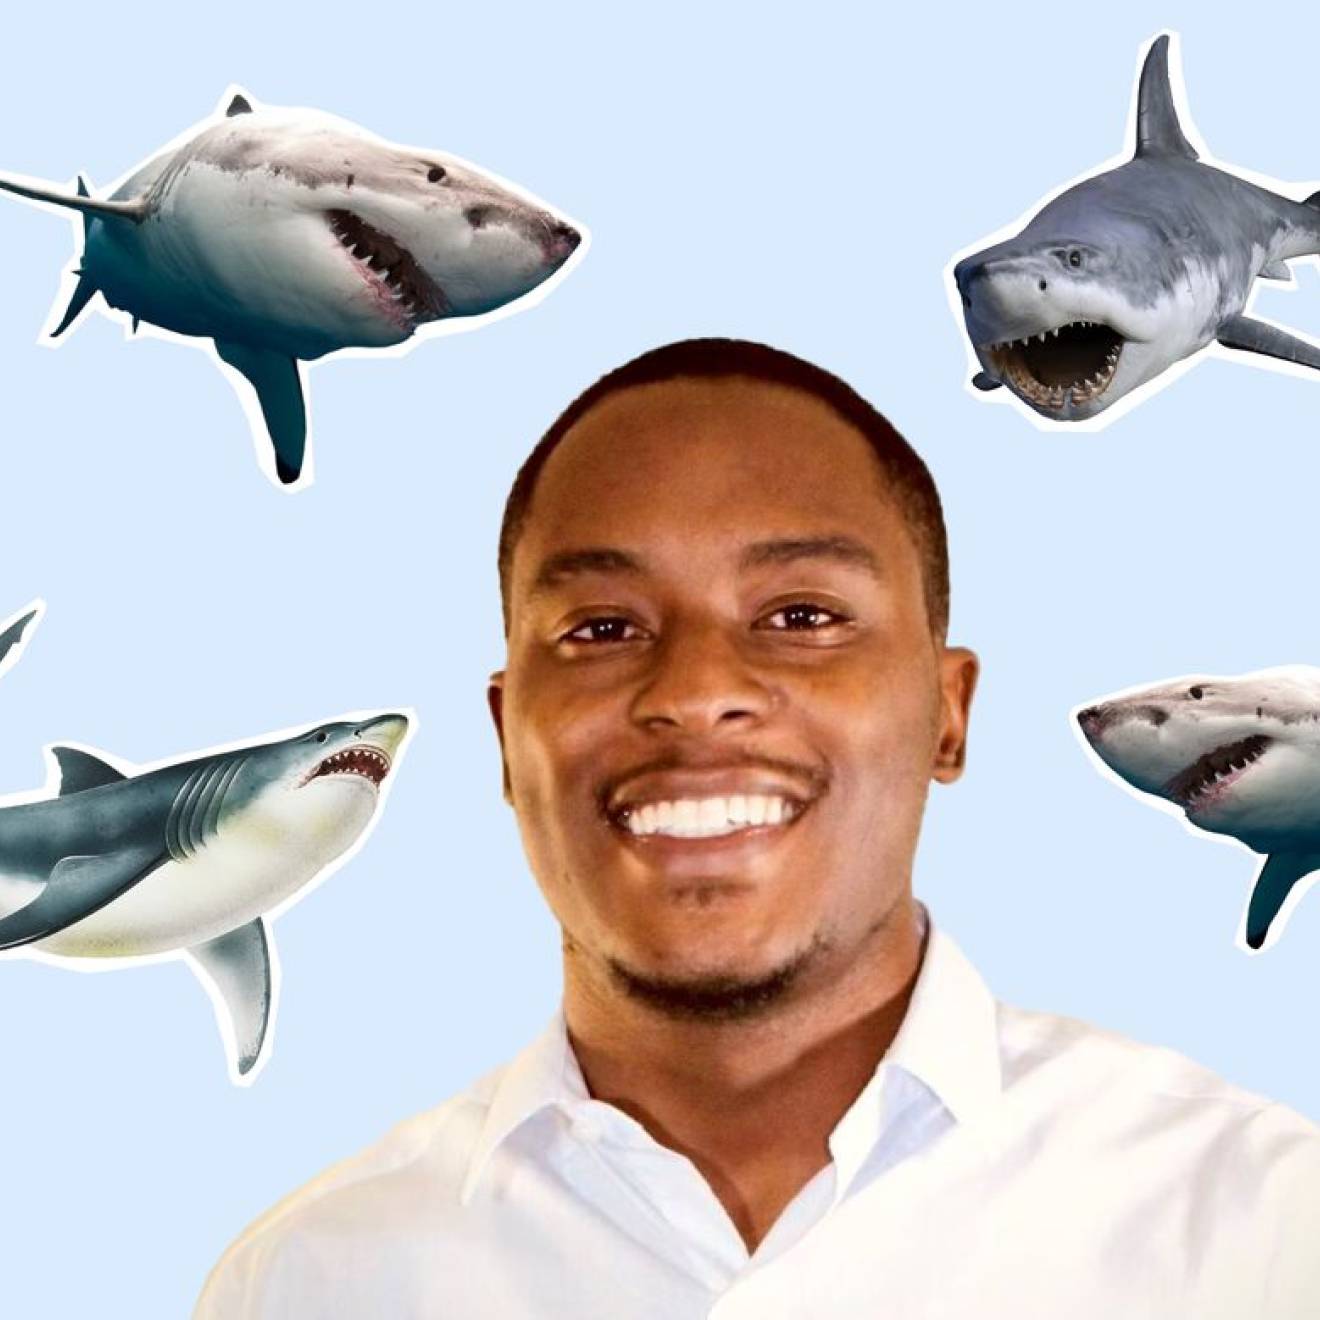 Young African American man De'Marcus Robinson, smiling, in the center of a shark collage